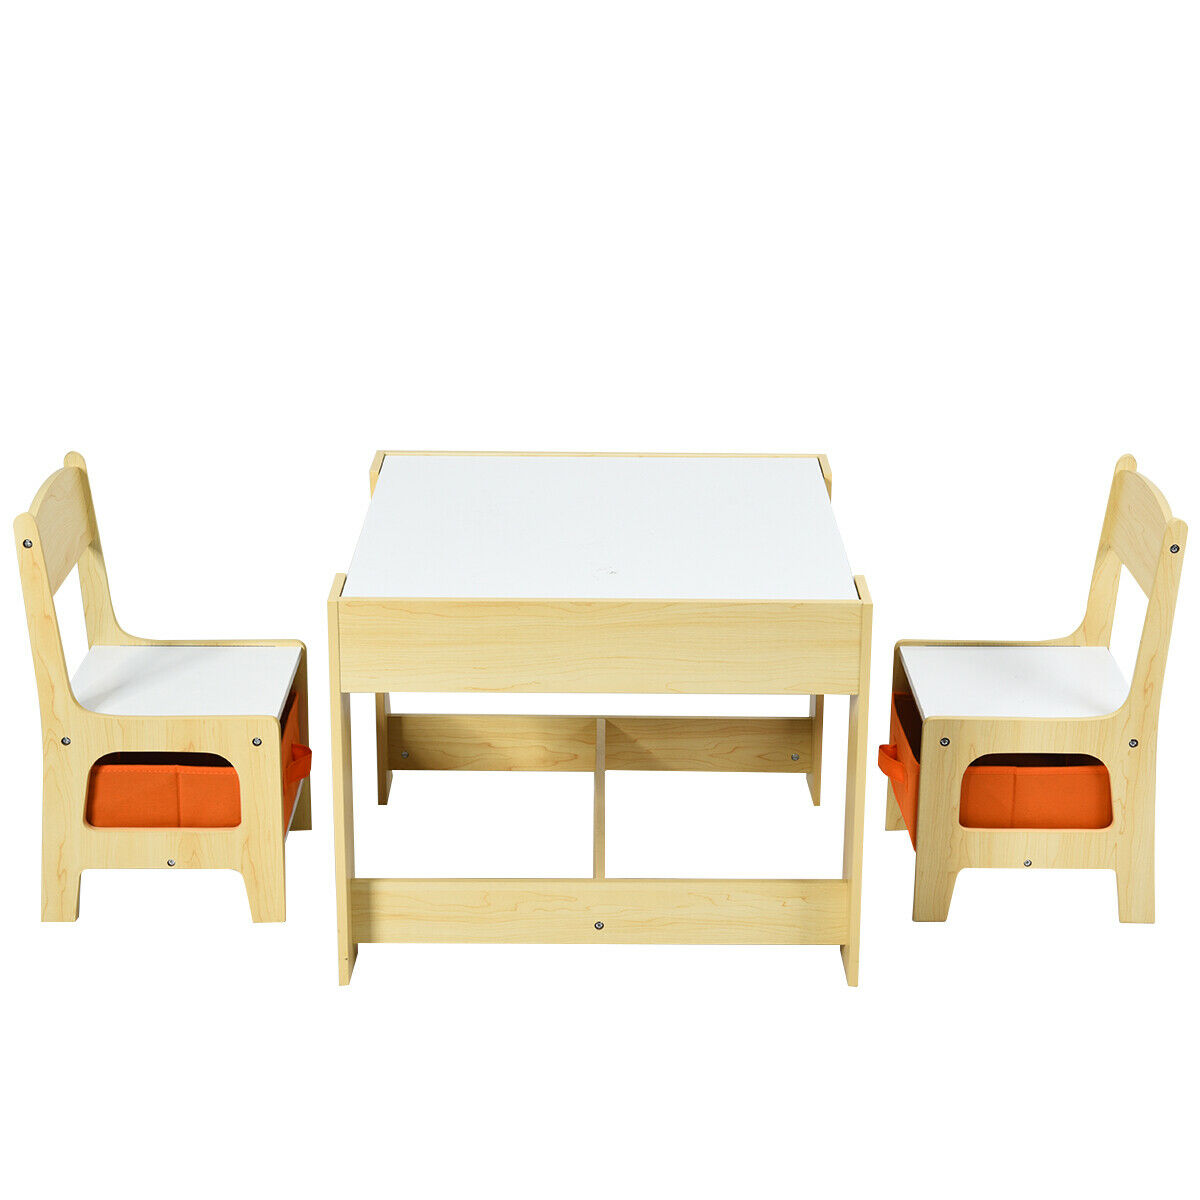 gymax children's table